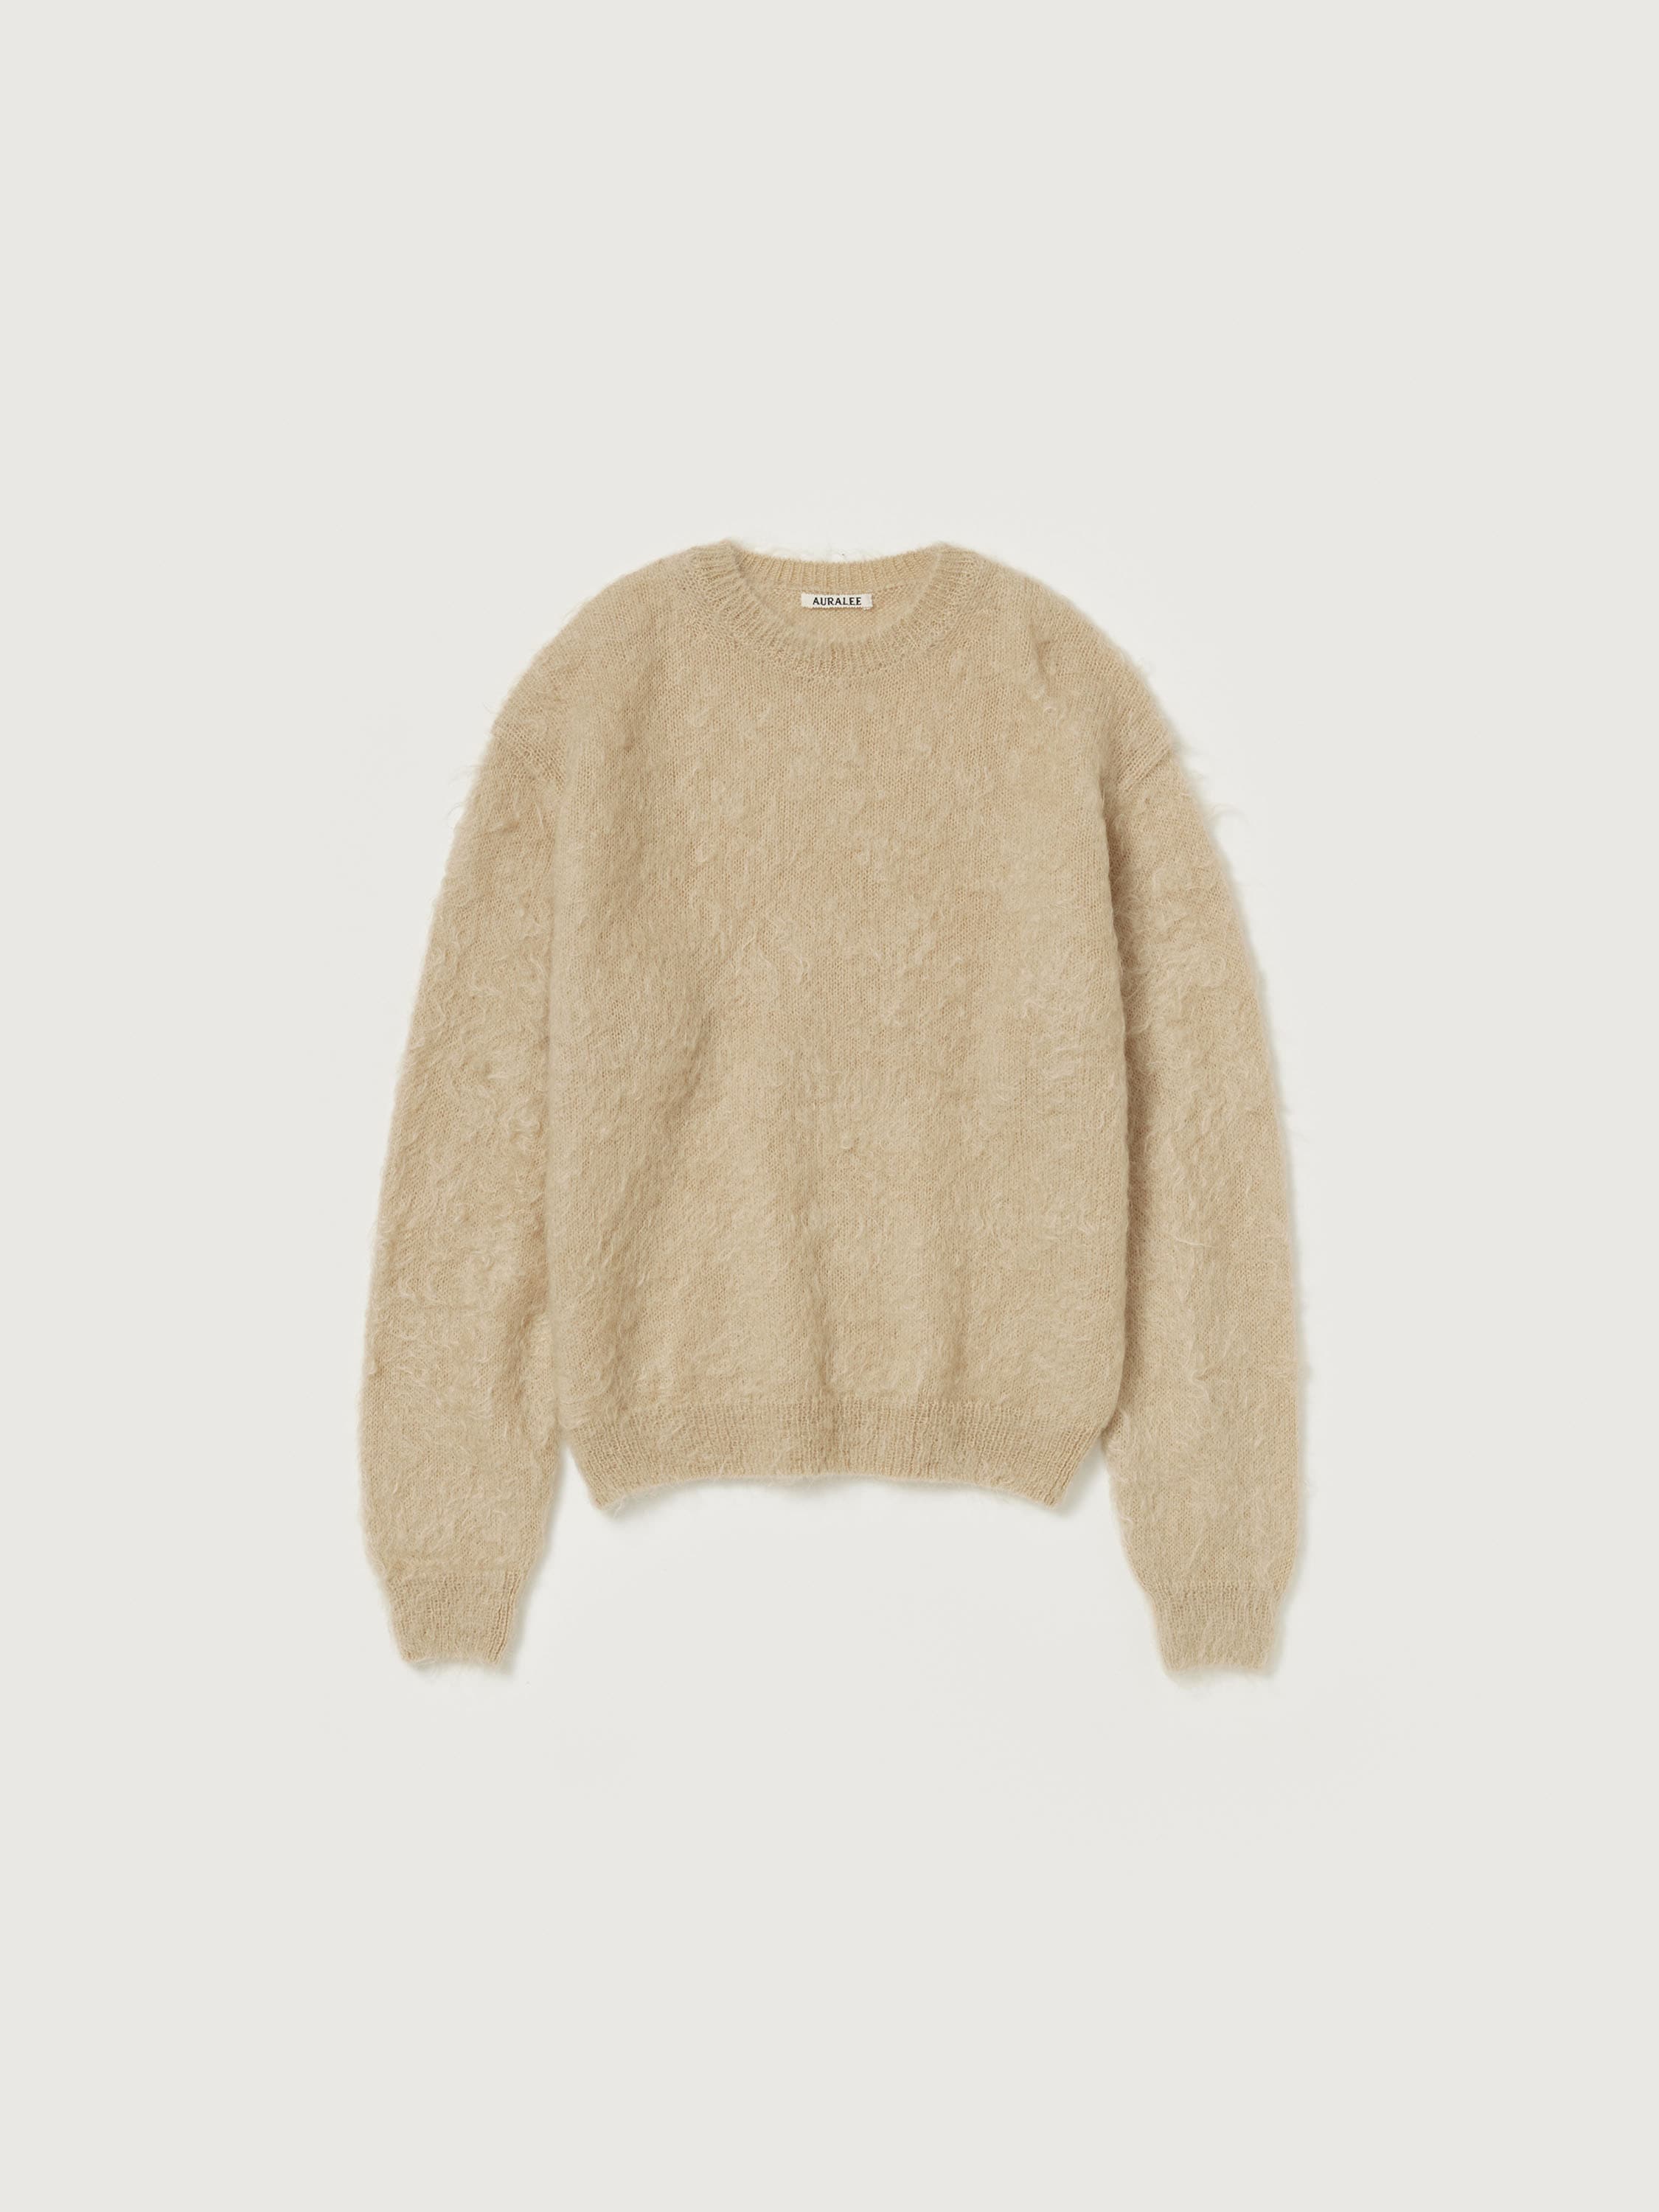 BRUSHED SUPER KID MOHAIR KNIT P/O 詳細画像 BEIGE 1